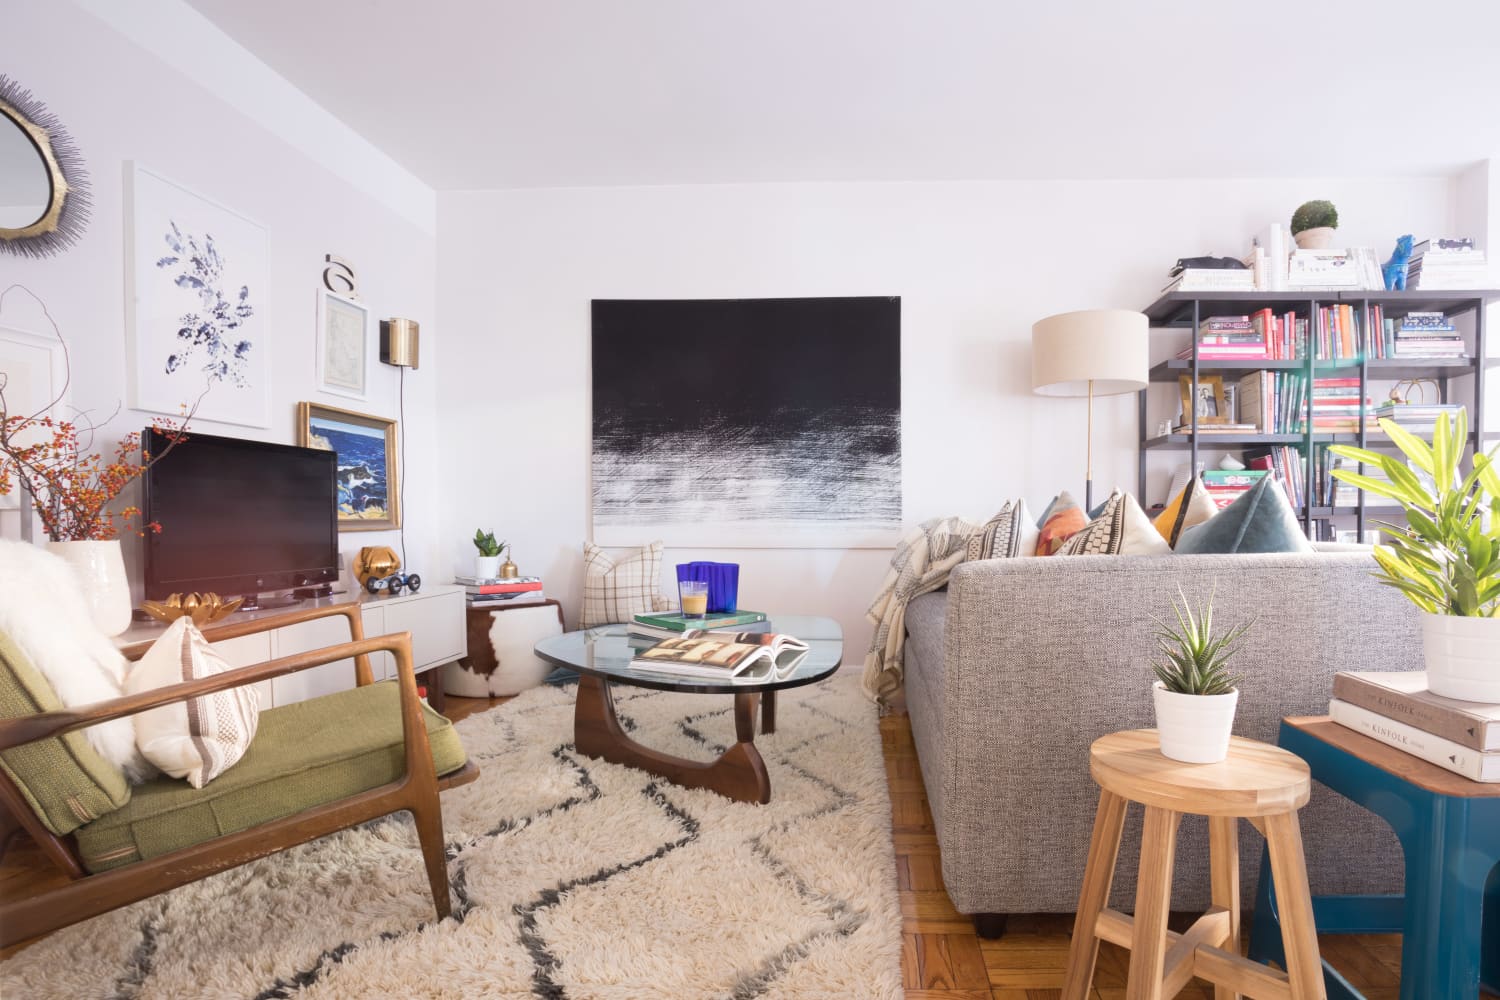 NYC Home Tour: A Mid-Century Modern Eclectic Mix | Apartment Therapy